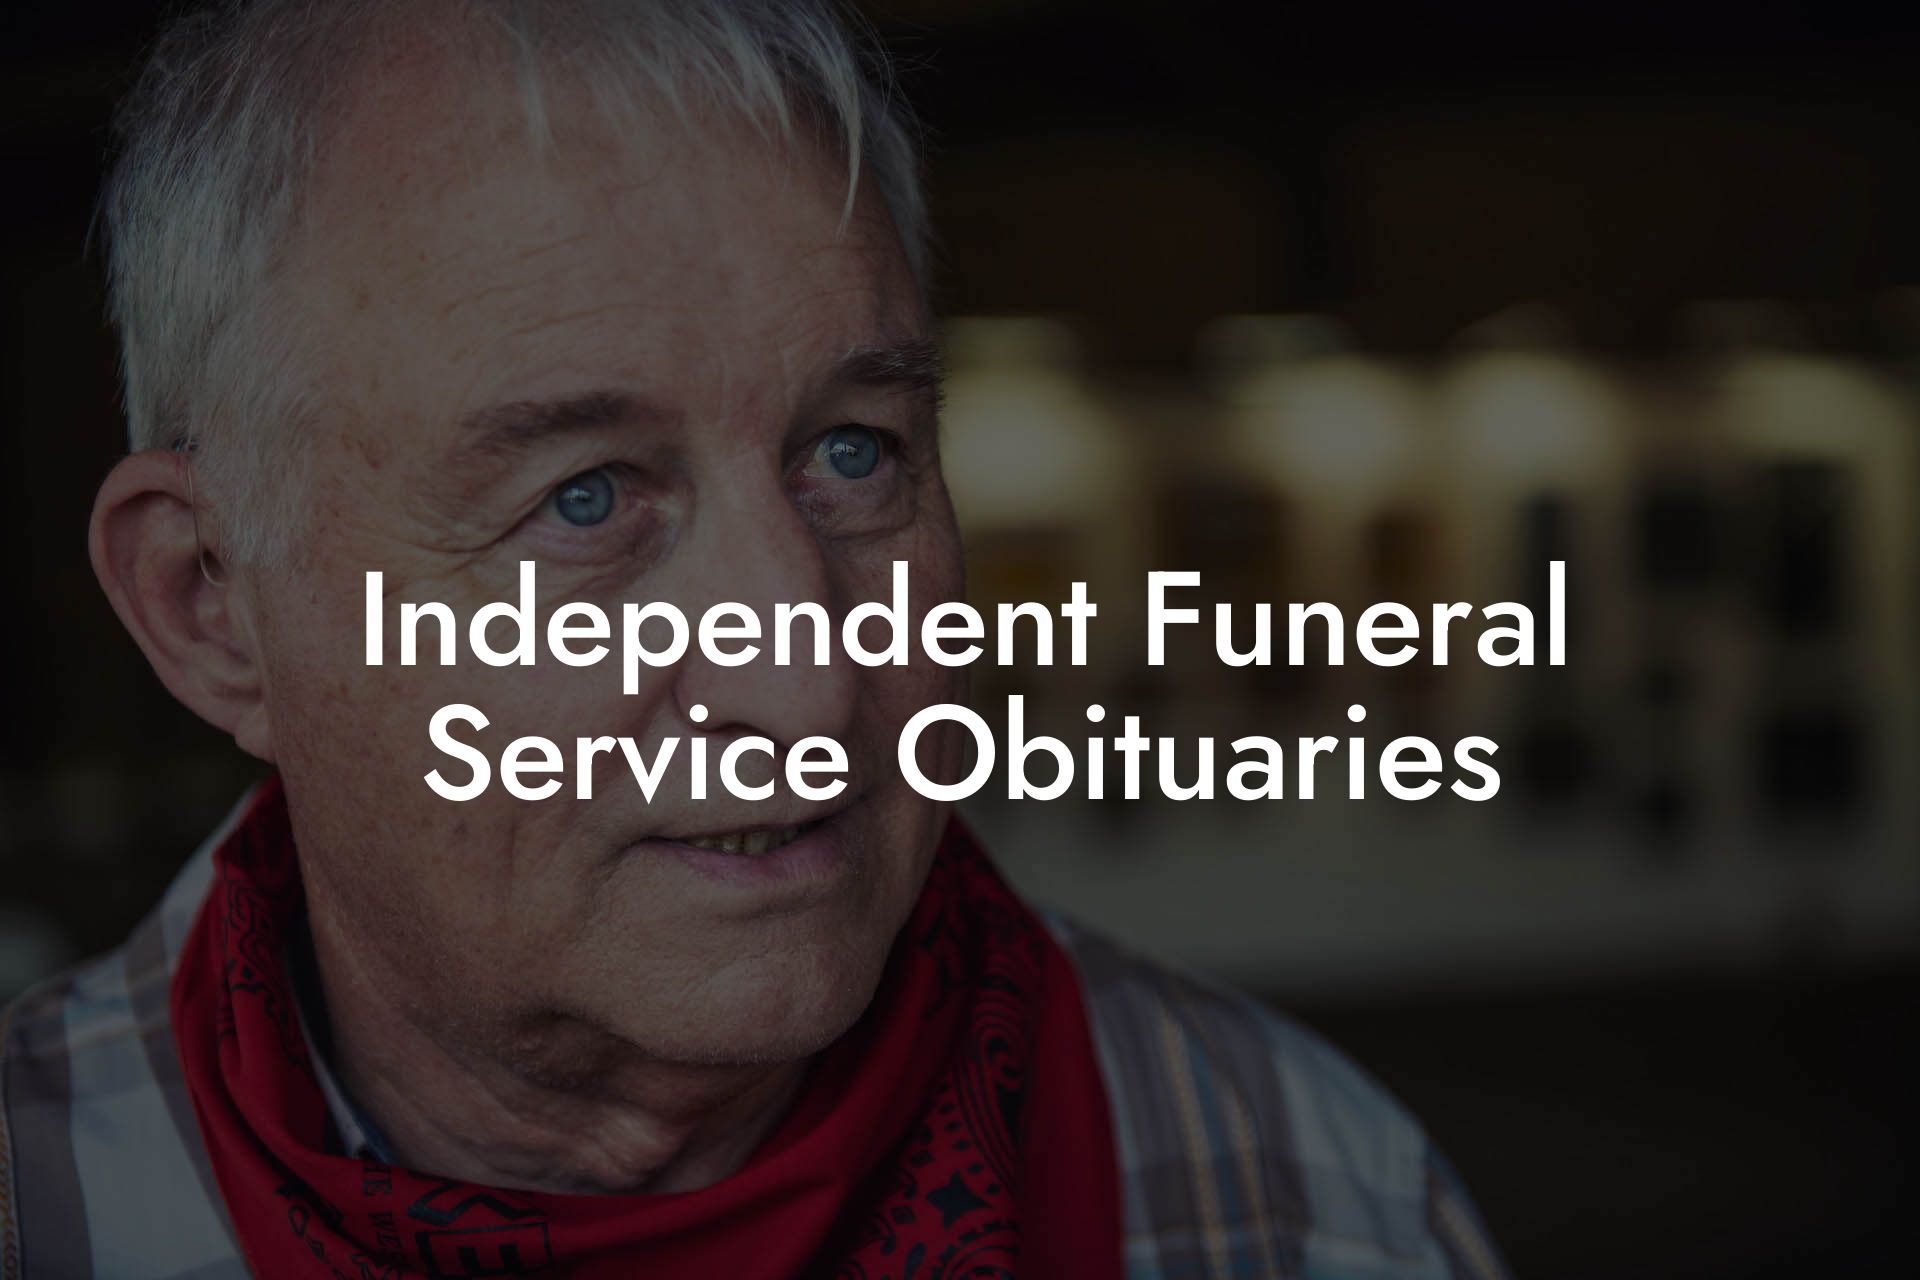 Independent Funeral Service Obituaries